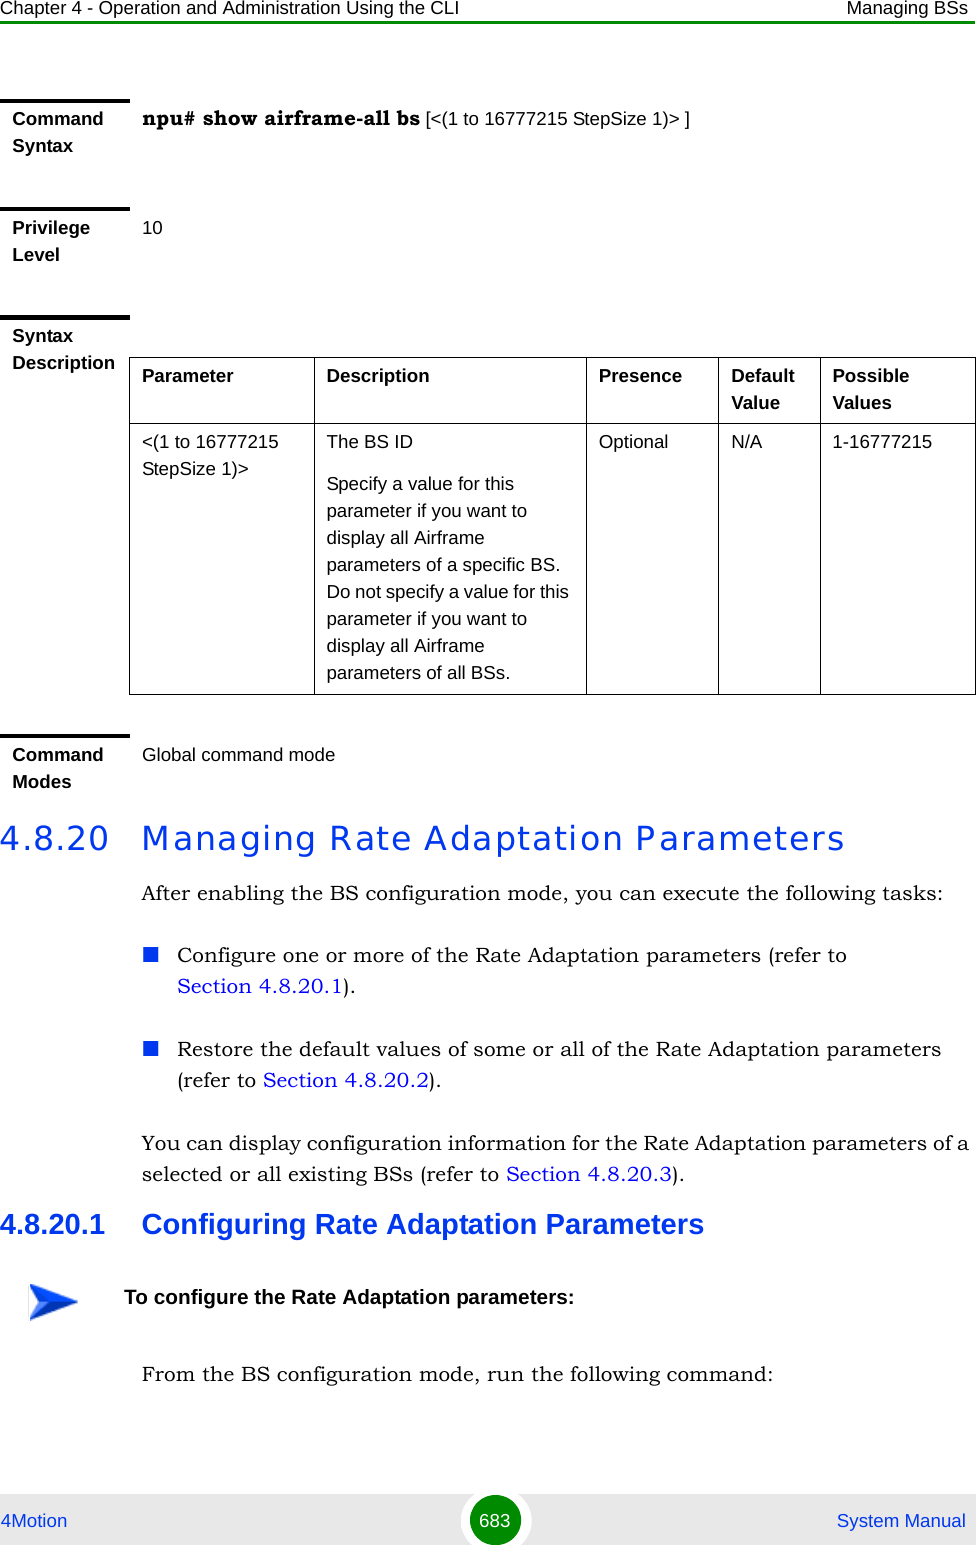 Chapter 4 - Operation and Administration Using the CLI Managing BSs4Motion 683  System Manual4.8.20 Managing Rate Adaptation ParametersAfter enabling the BS configuration mode, you can execute the following tasks:Configure one or more of the Rate Adaptation parameters (refer to Section 4.8.20.1).Restore the default values of some or all of the Rate Adaptation parameters (refer to Section 4.8.20.2).You can display configuration information for the Rate Adaptation parameters of a selected or all existing BSs (refer to Section 4.8.20.3).4.8.20.1 Configuring Rate Adaptation ParametersFrom the BS configuration mode, run the following command:Command Syntaxnpu# show airframe-all bs [&lt;(1 to 16777215 StepSize 1)&gt; ]Privilege Level10Syntax Description Parameter Description Presence Default ValuePossible Values&lt;(1 to 16777215 StepSize 1)&gt;The BS ID Specify a value for this parameter if you want to display all Airframe parameters of a specific BS. Do not specify a value for this parameter if you want to display all Airframe parameters of all BSs.Optional N/A 1-16777215Command ModesGlobal command modeTo configure the Rate Adaptation parameters: